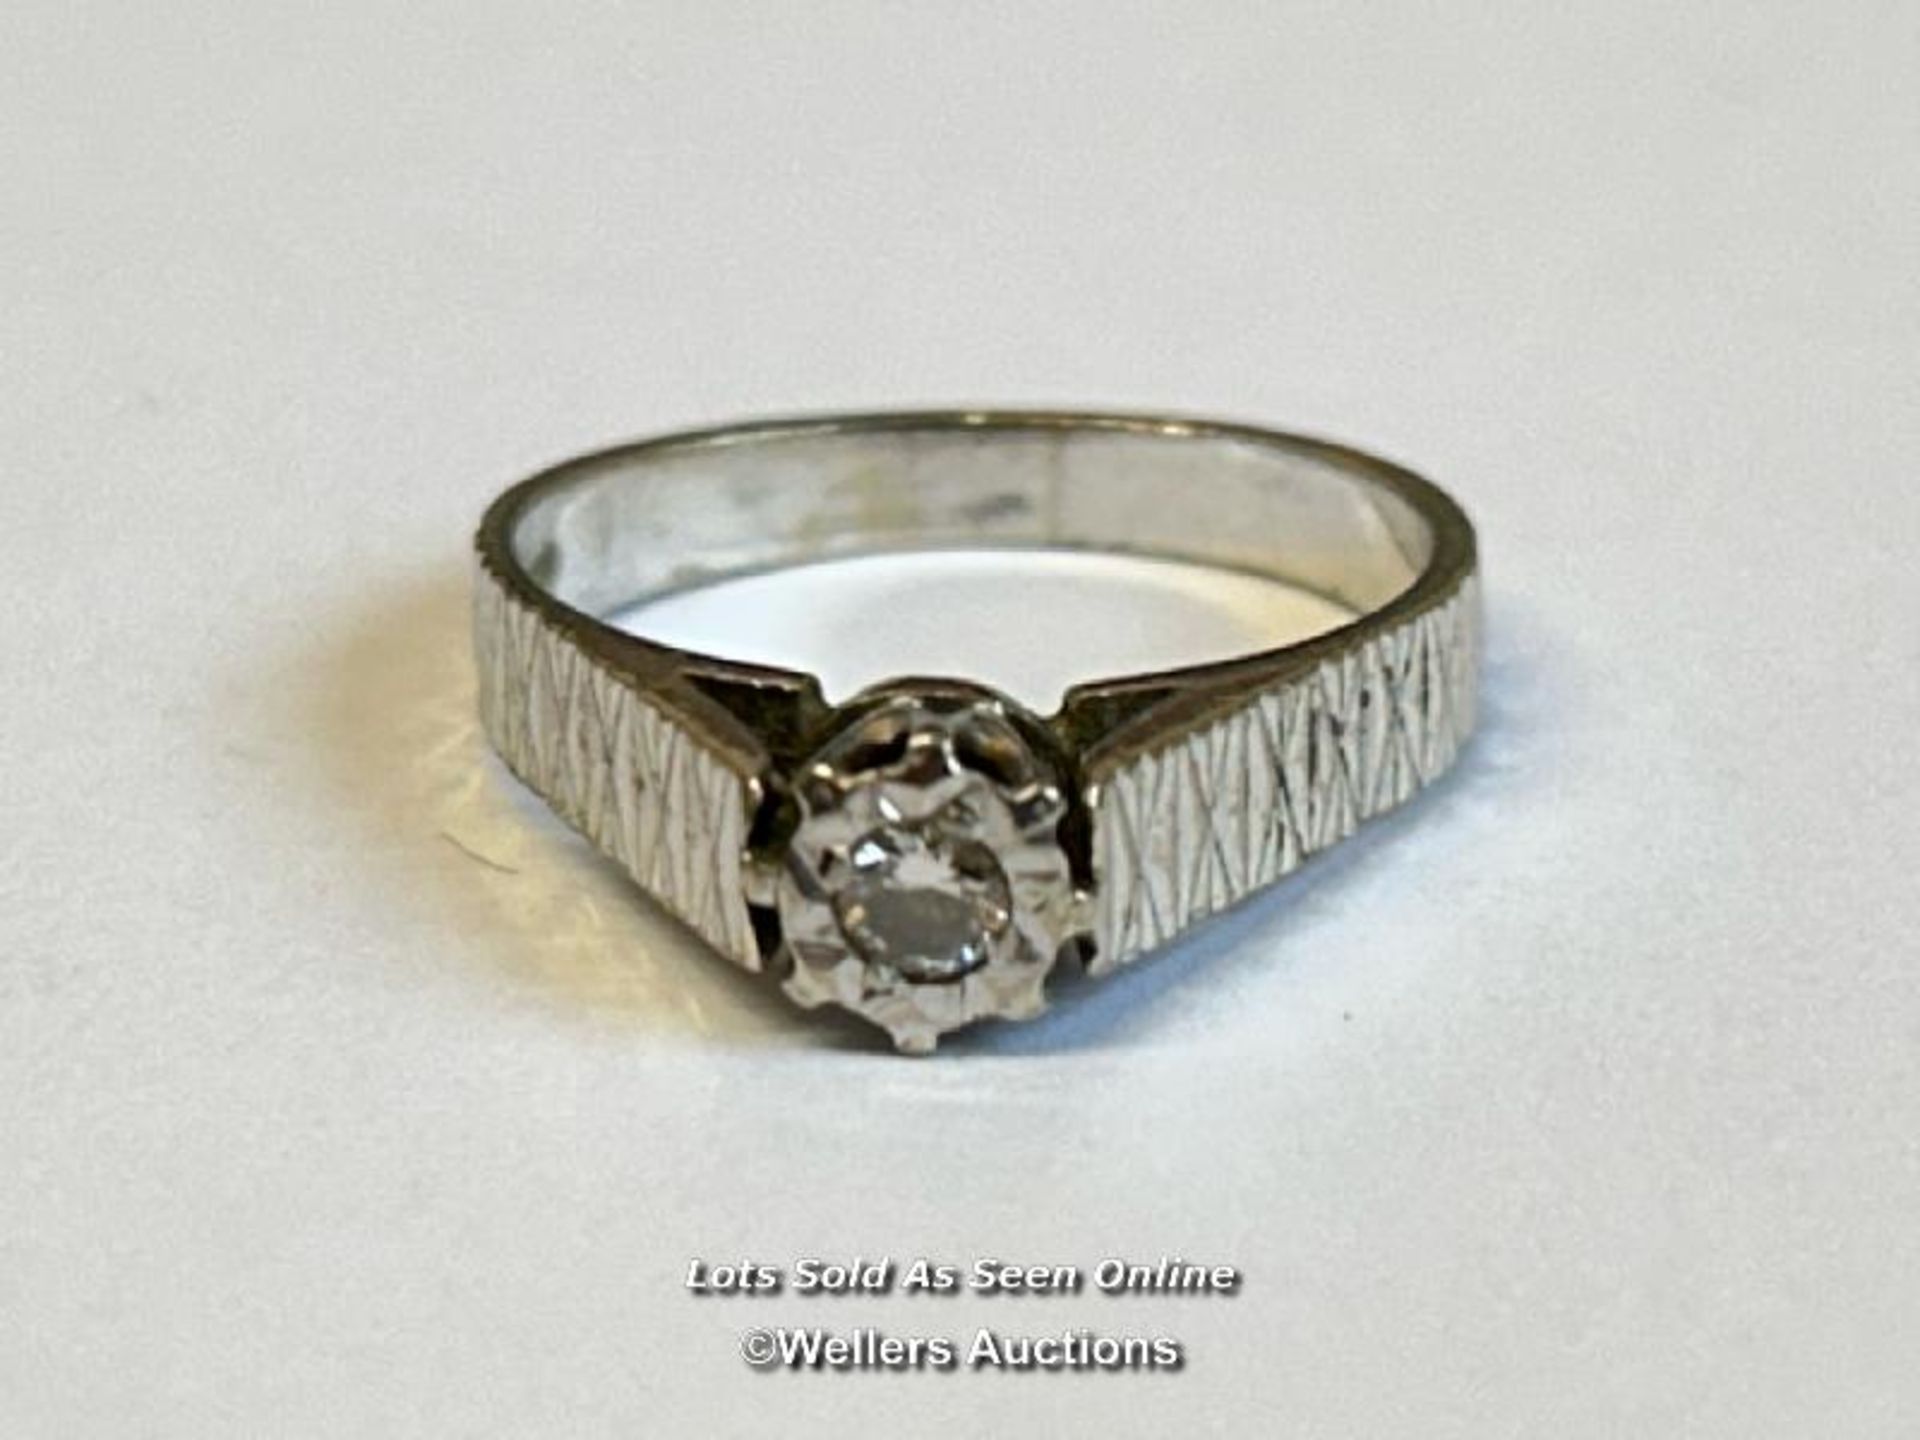 A hallmarked 18ct white gold ring set with a solitaire diamond in an illusion setting with - Image 2 of 6